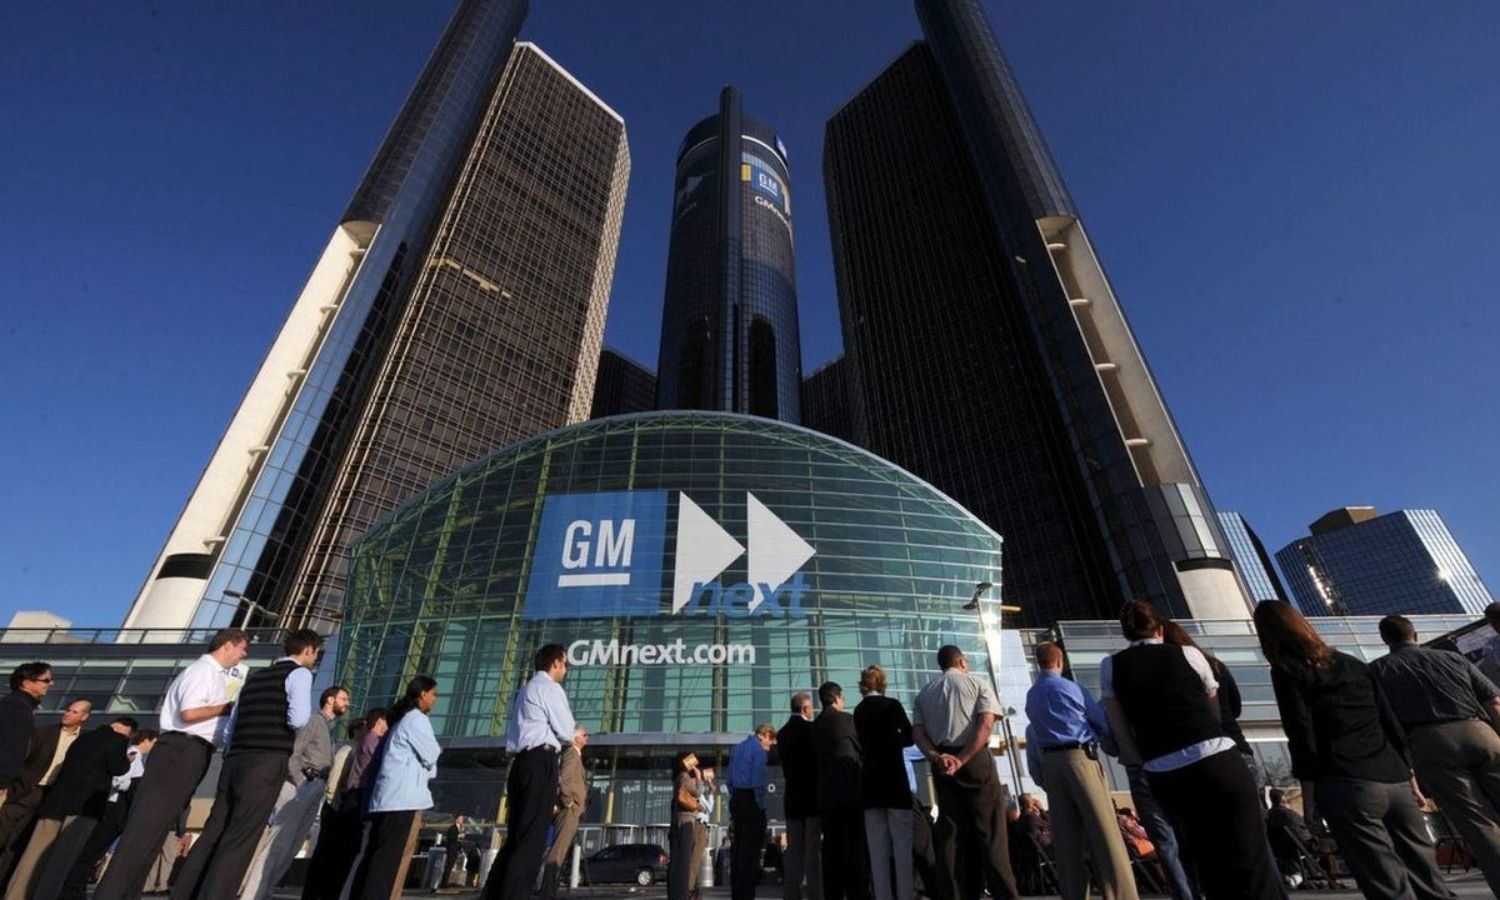 OTD in 2009: General Motors filed for Chapter 11 bankruptcy.